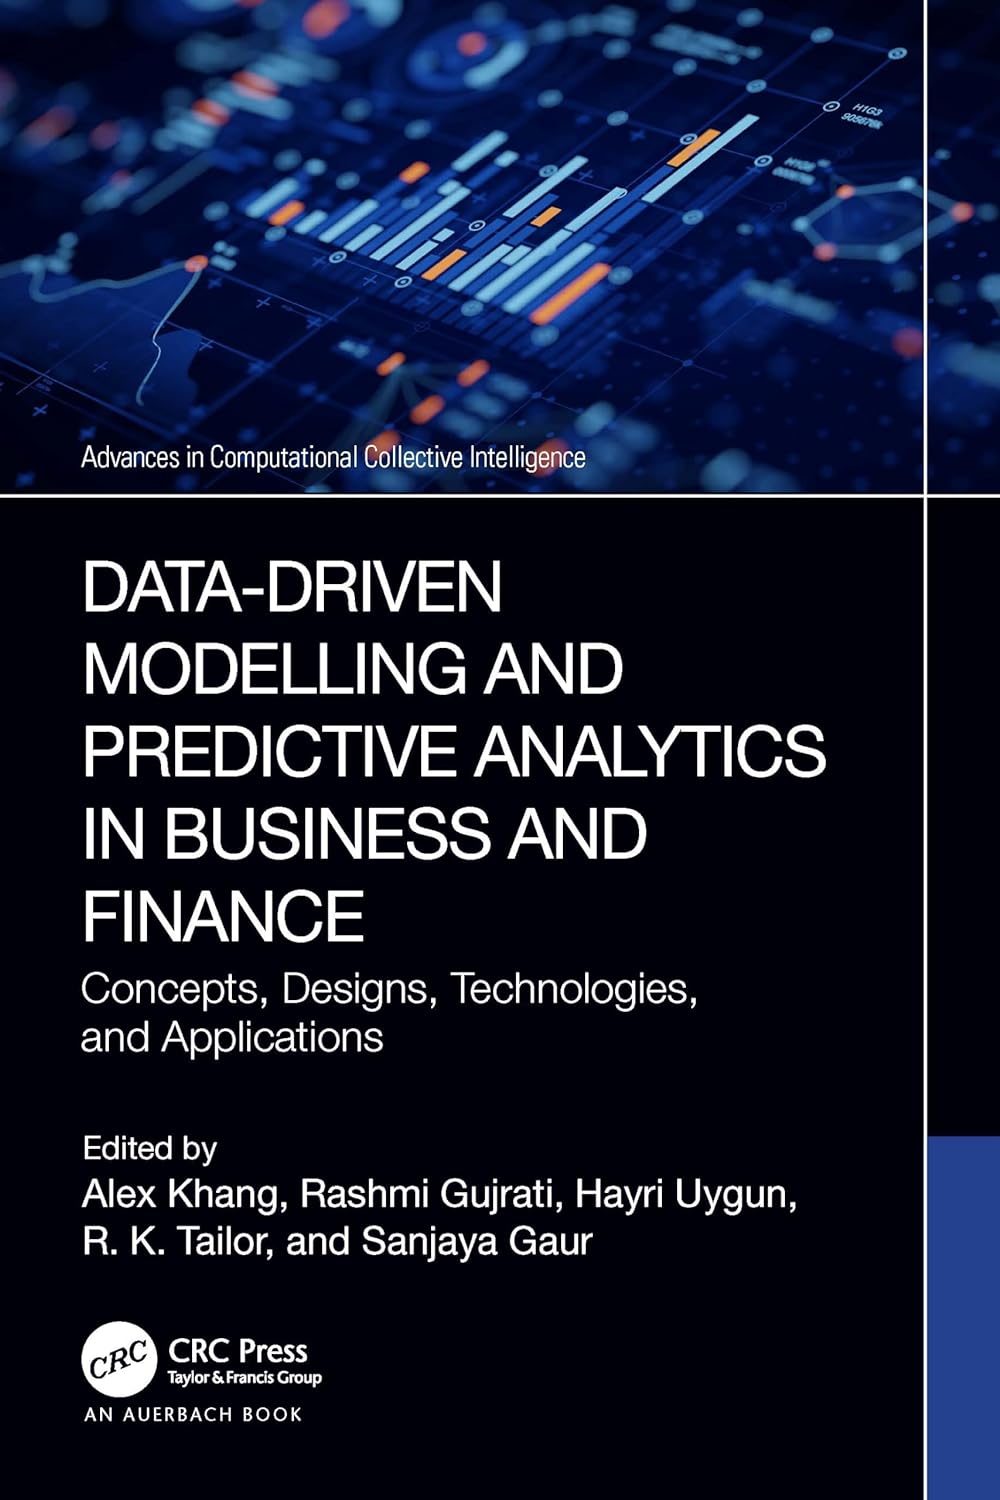 Data-driven Modelling and Predictive Analytics in Business and Finance